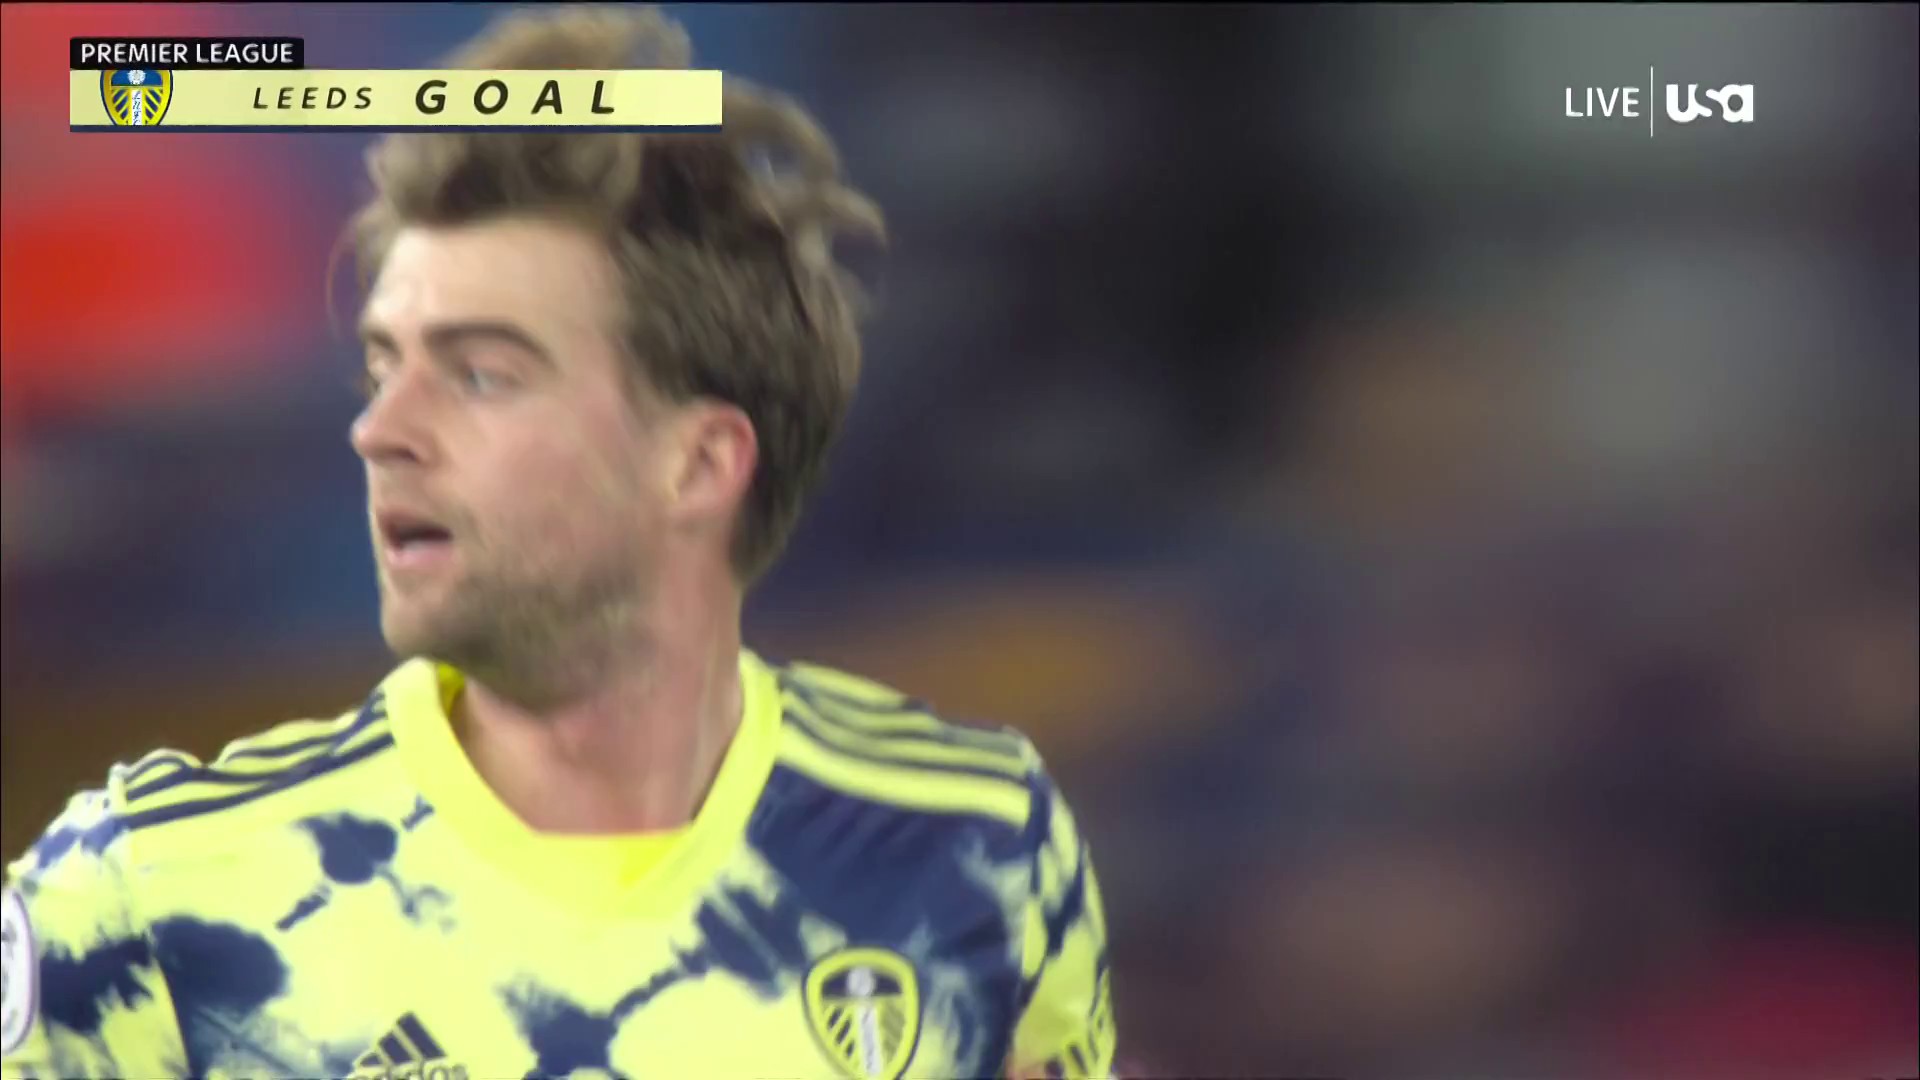 Leeds have life!

It's Patrick Bamford's first goal in over a year!
📺: @USA_Network 
#MyPLMorning | #AVLLEE”